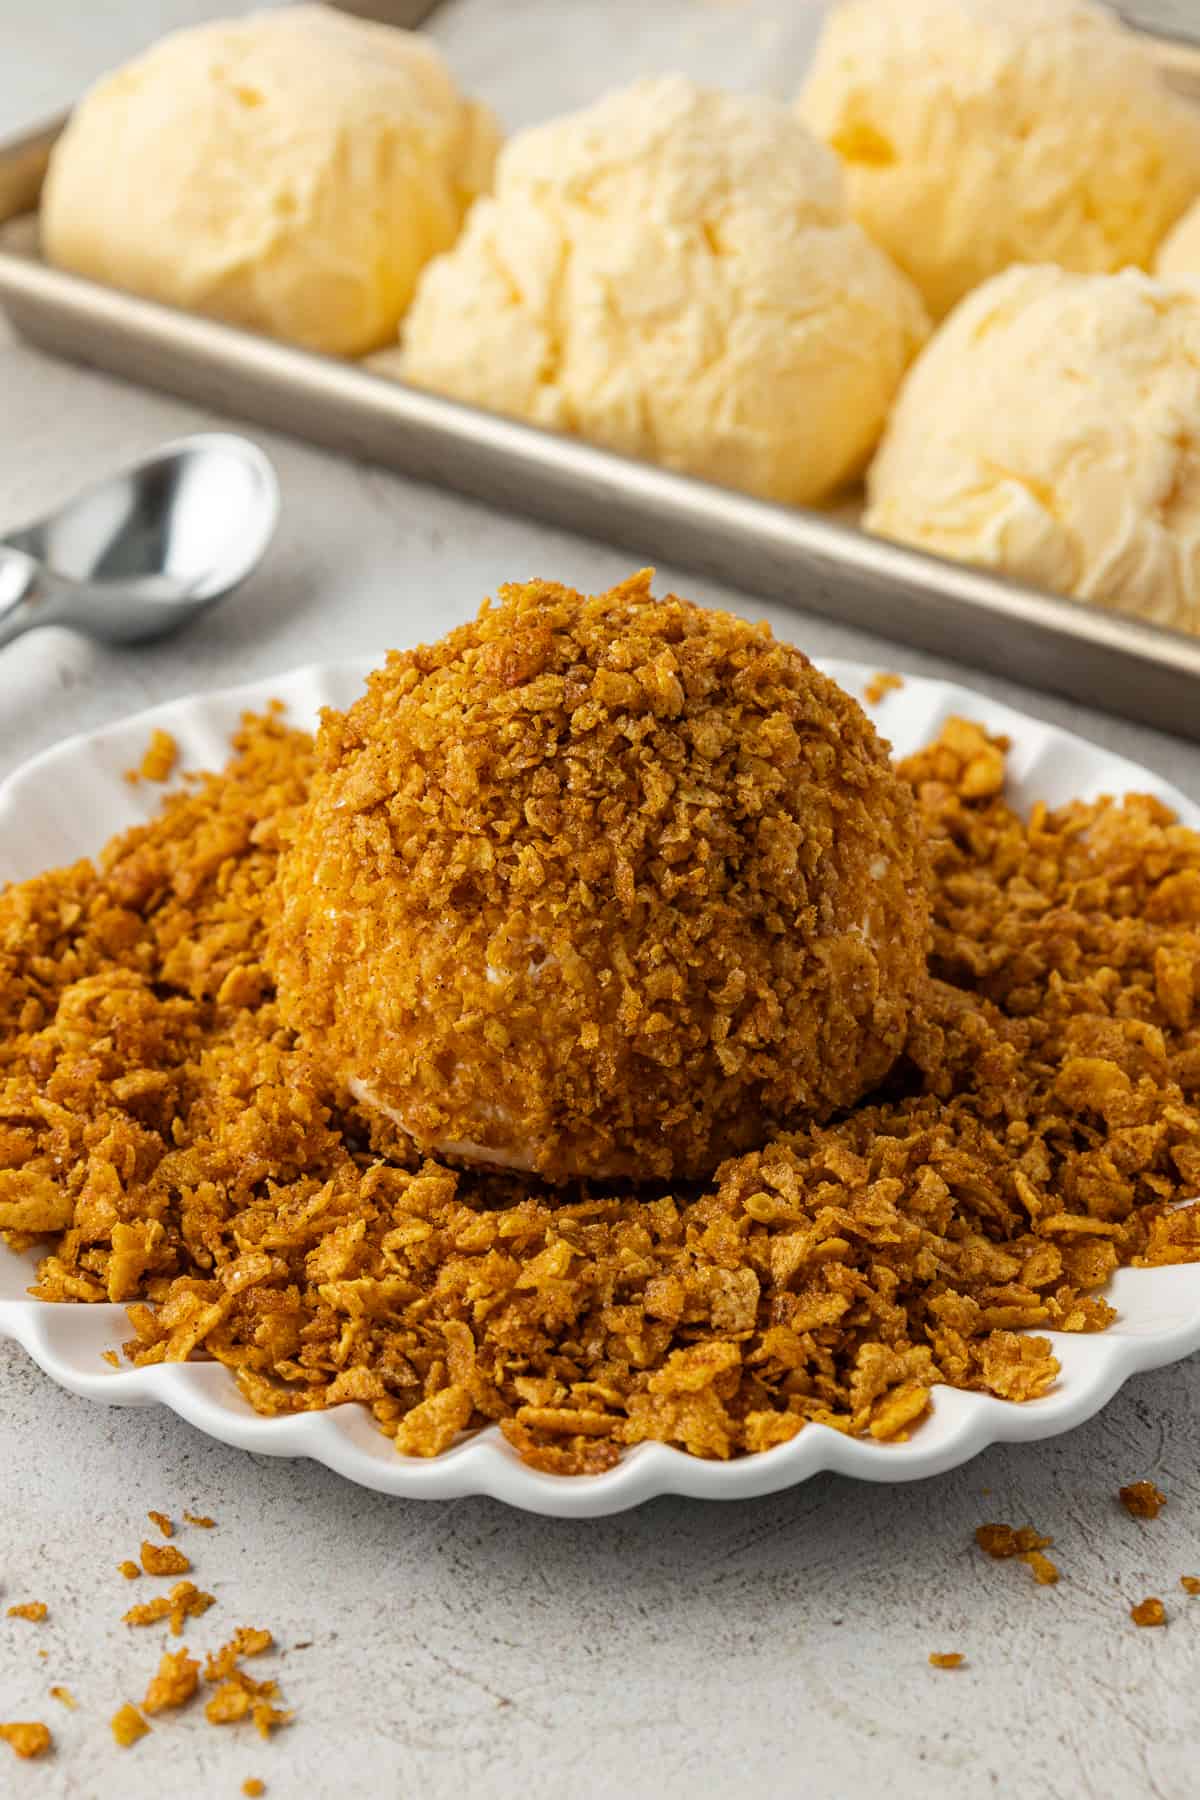 a ball of ice cream coated in a corn flake cereal mixture on top of more crushed corn flake mixture on a white plate, beside a sheet pan with rows of vanilla ice cream balls on it